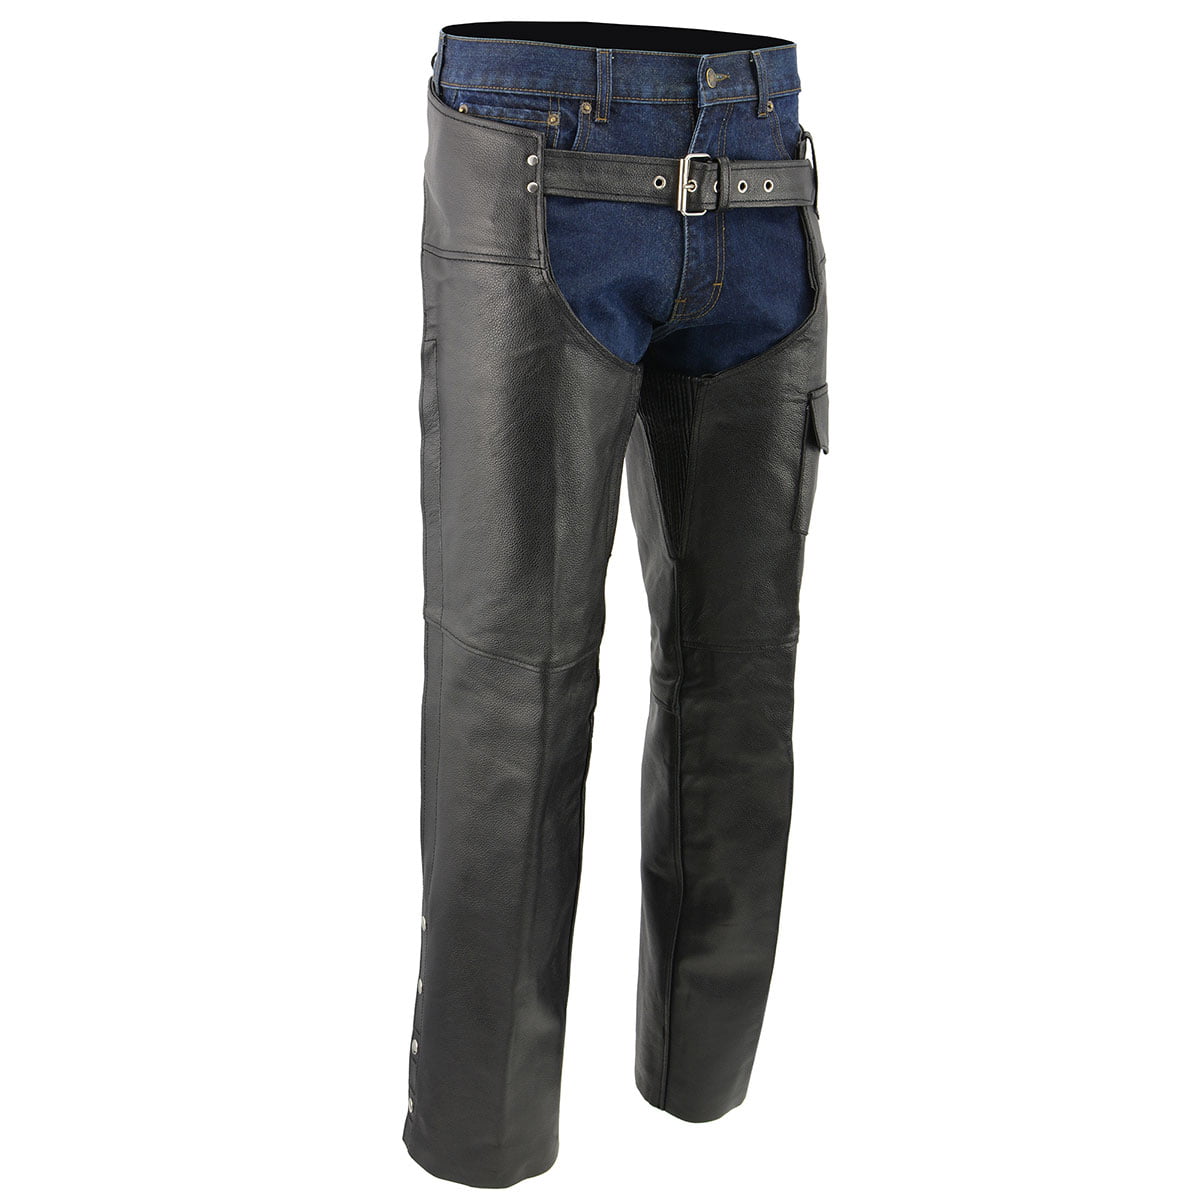 LEATHER CHAPS CLASSIC JEAN POCKETS FOR MEN WOMEN 